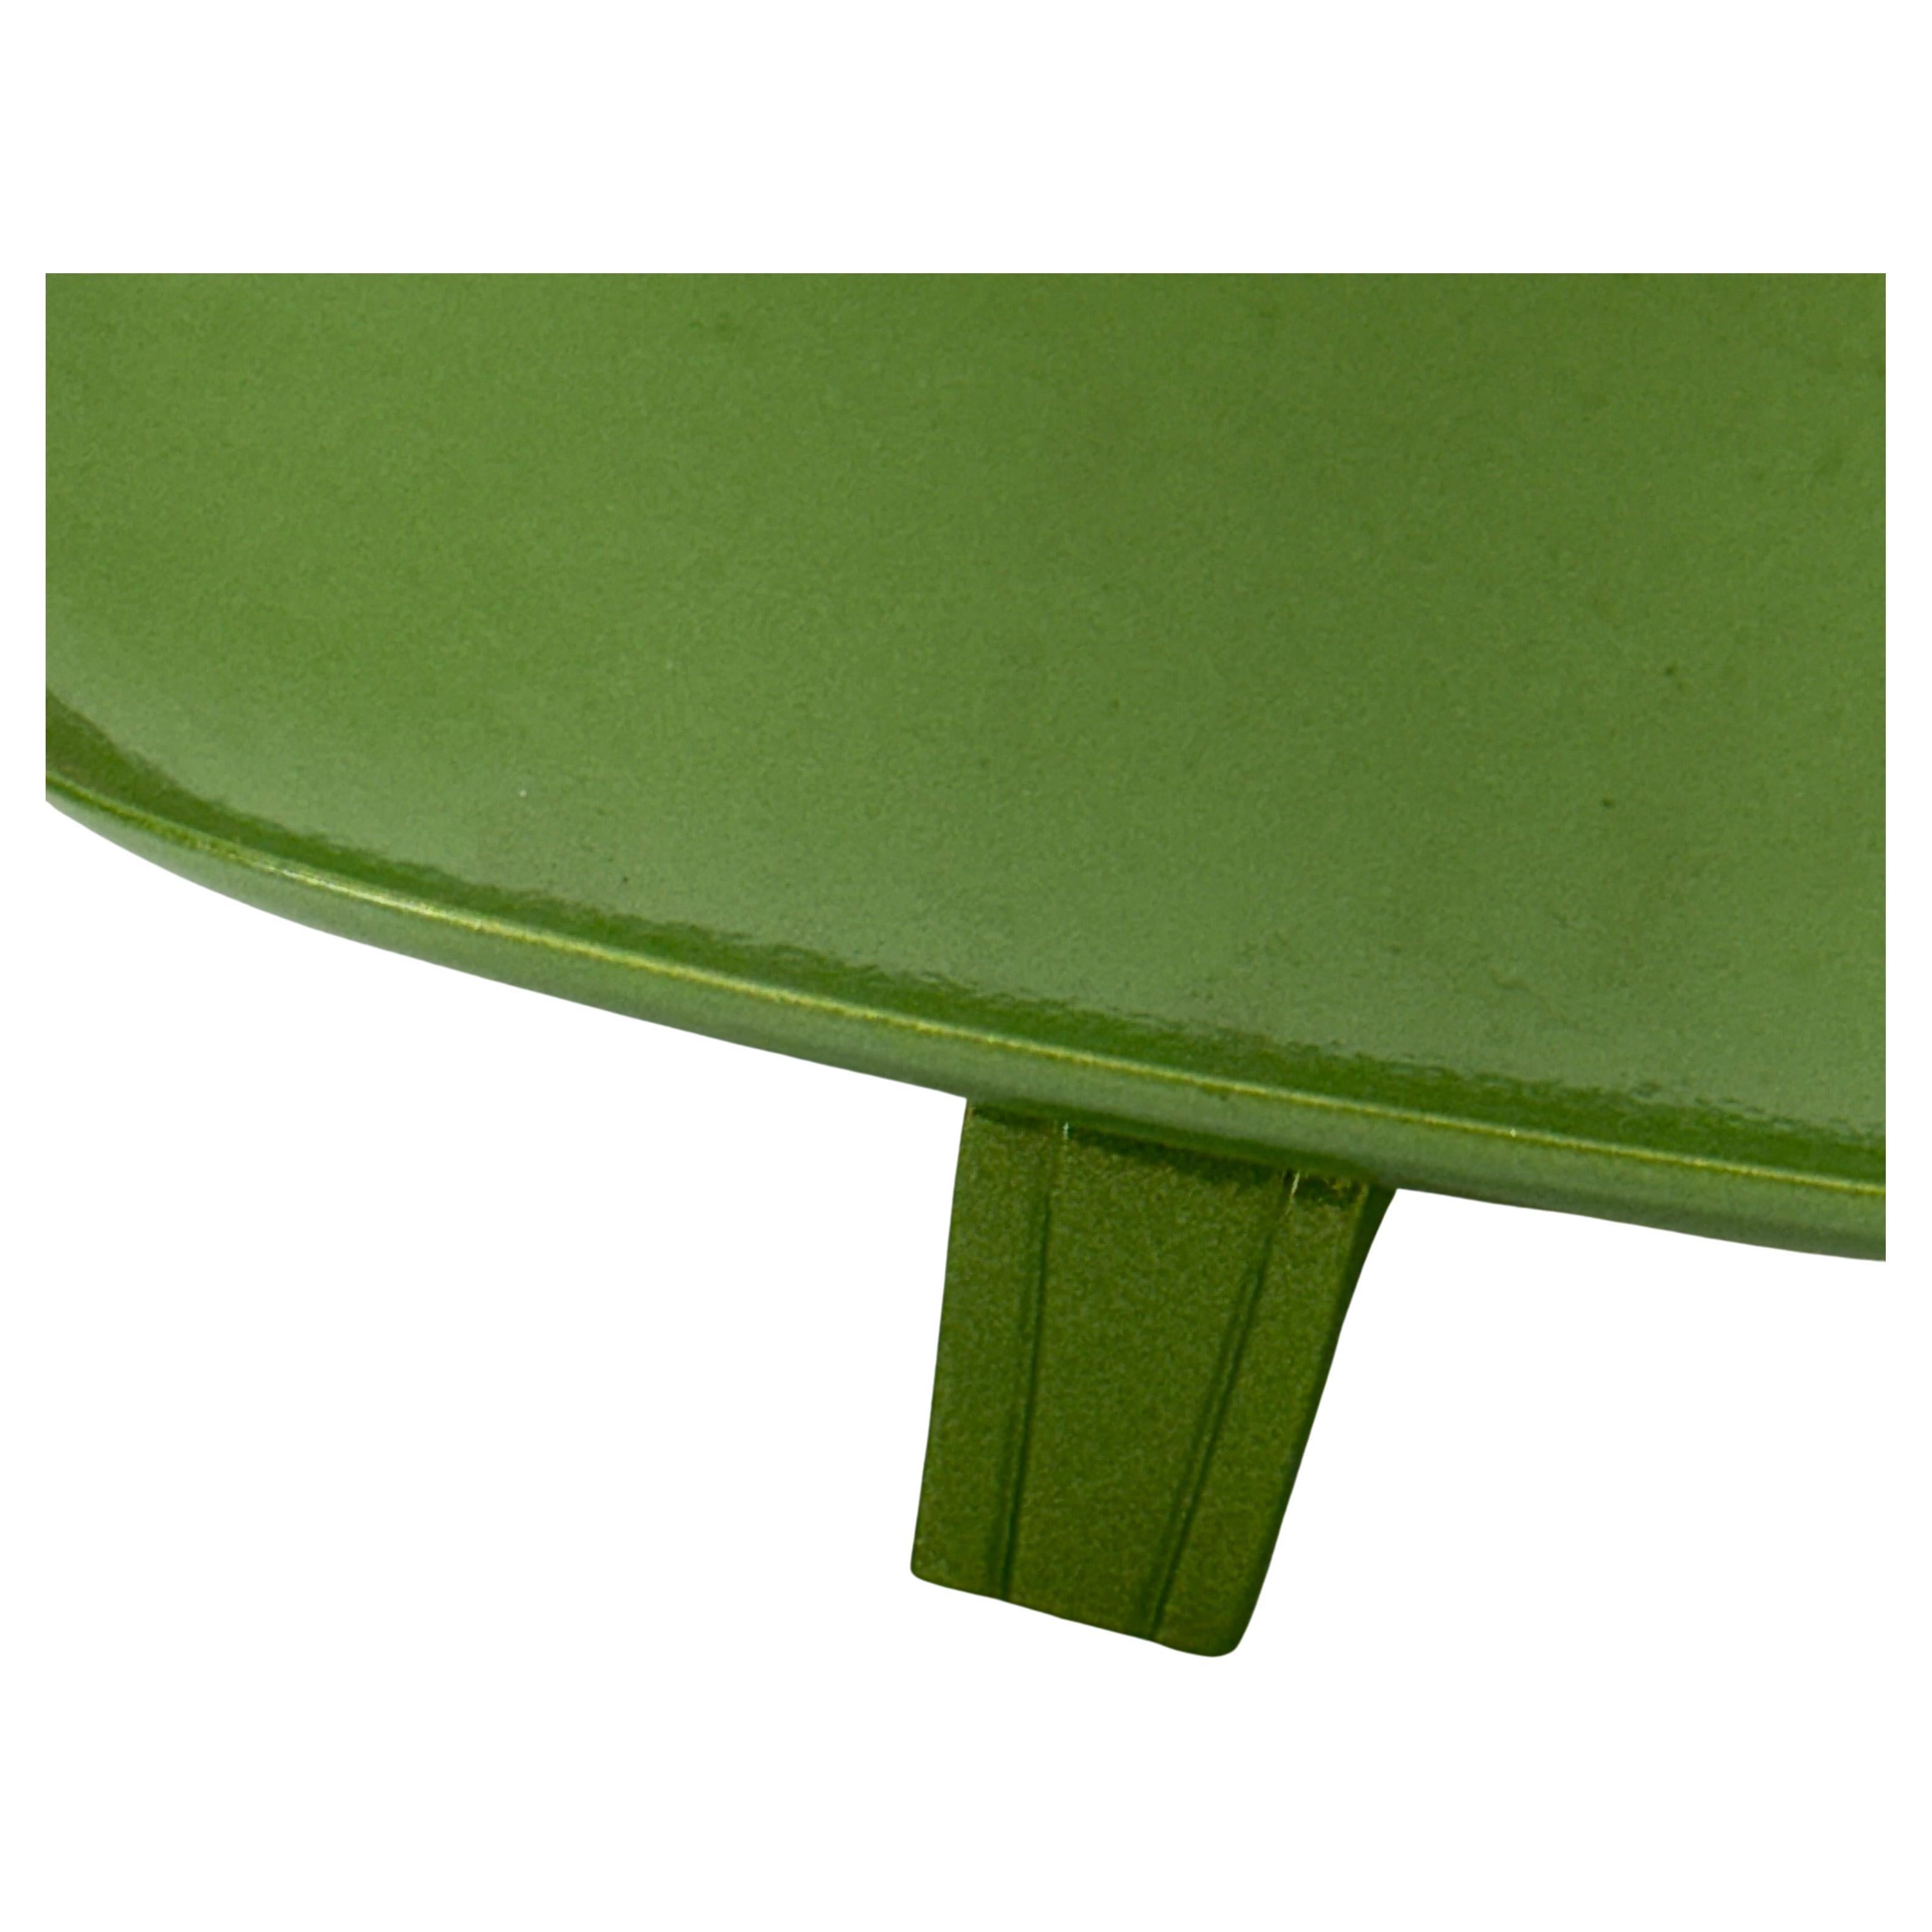 Hand-Crafted Mid-Century Modern Powder-Coated Leafy Green Metal Tray or Dish For Sale